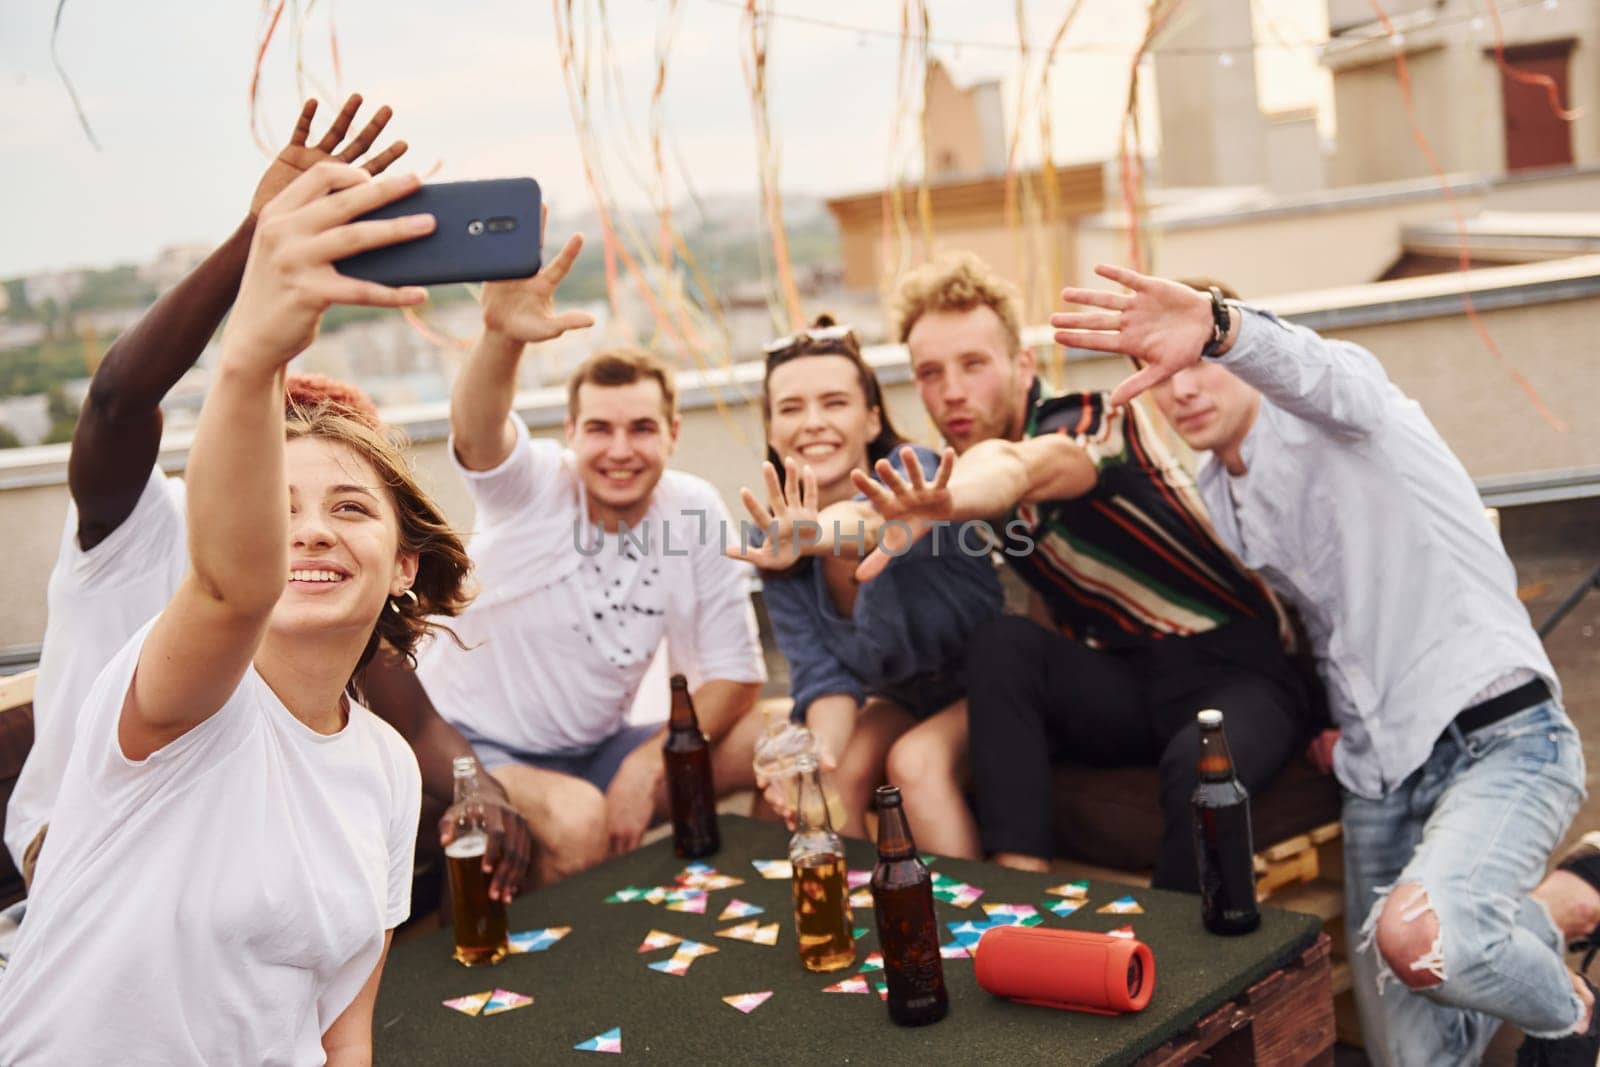 Girl doing photo when people playing card game. Group of young people in casual clothes have a party at rooftop together at daytime.